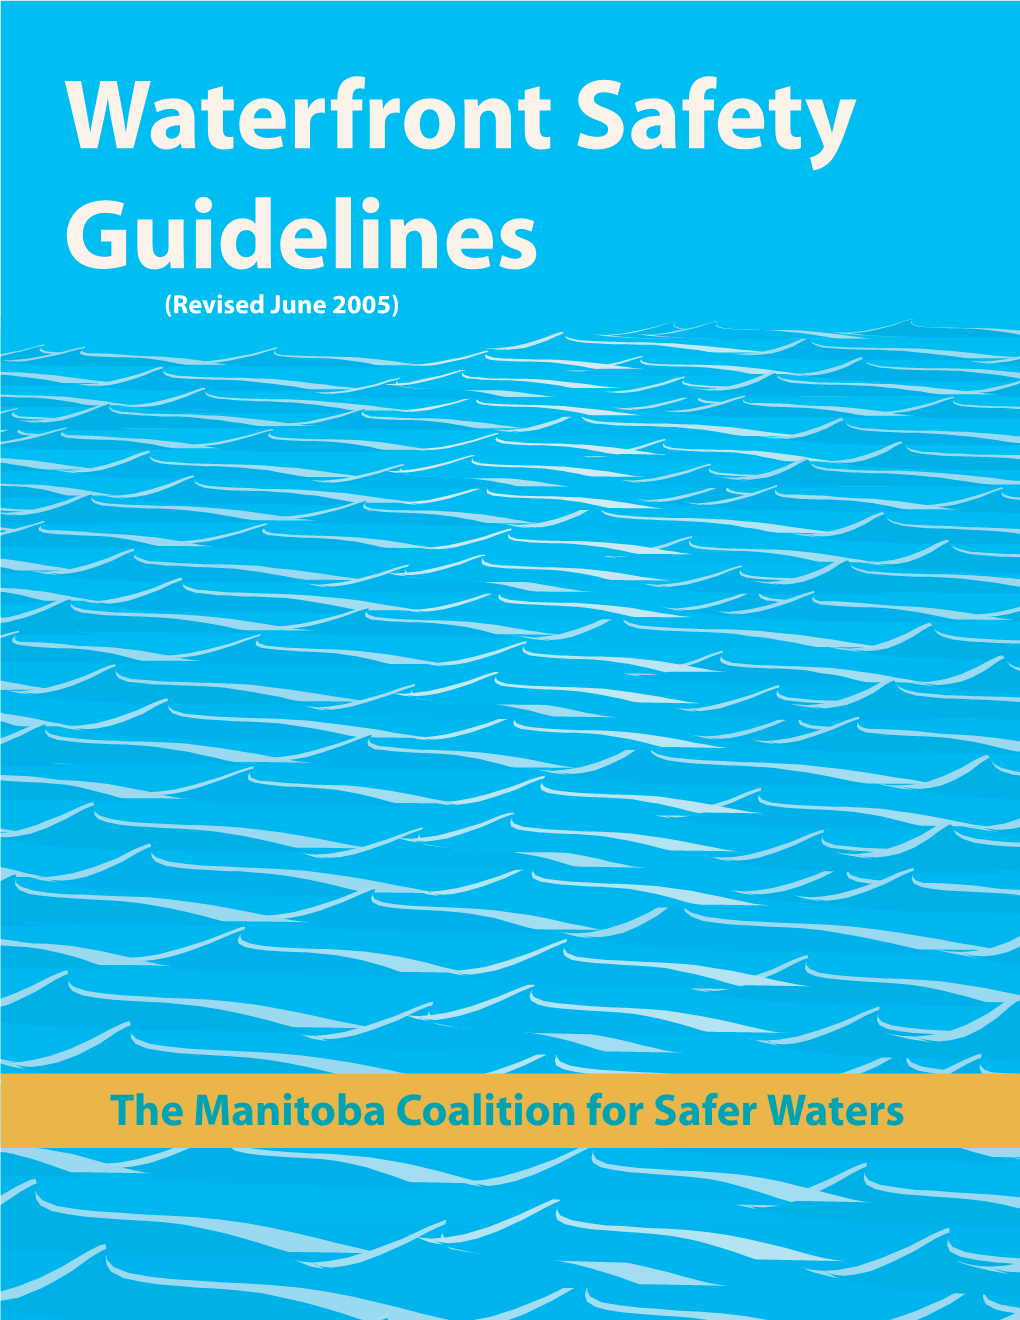 Waterfront Safety Guidelines (Revised June 2005)